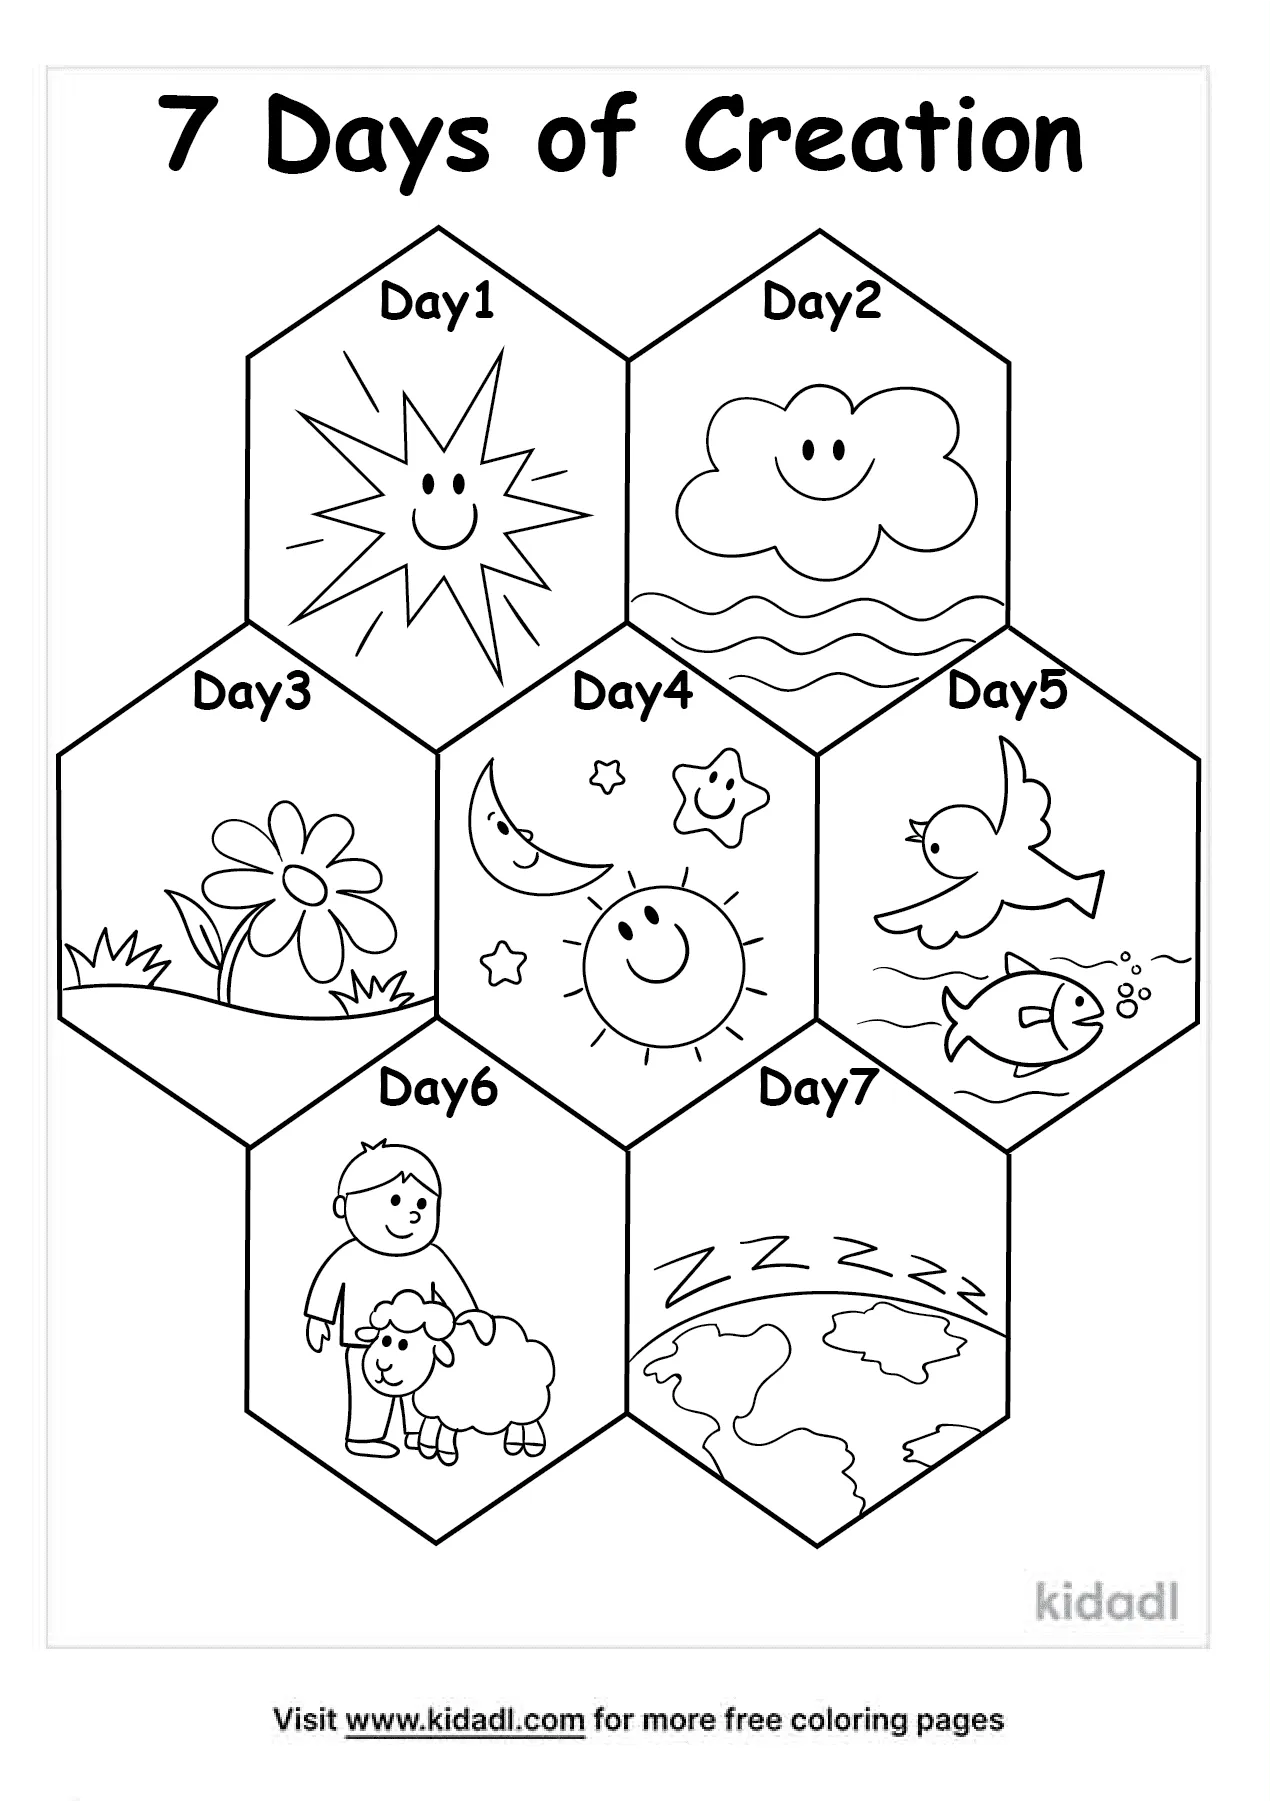 20 Days Of Creation Coloring Pages   Free Bible Coloring Pages   Kidadl